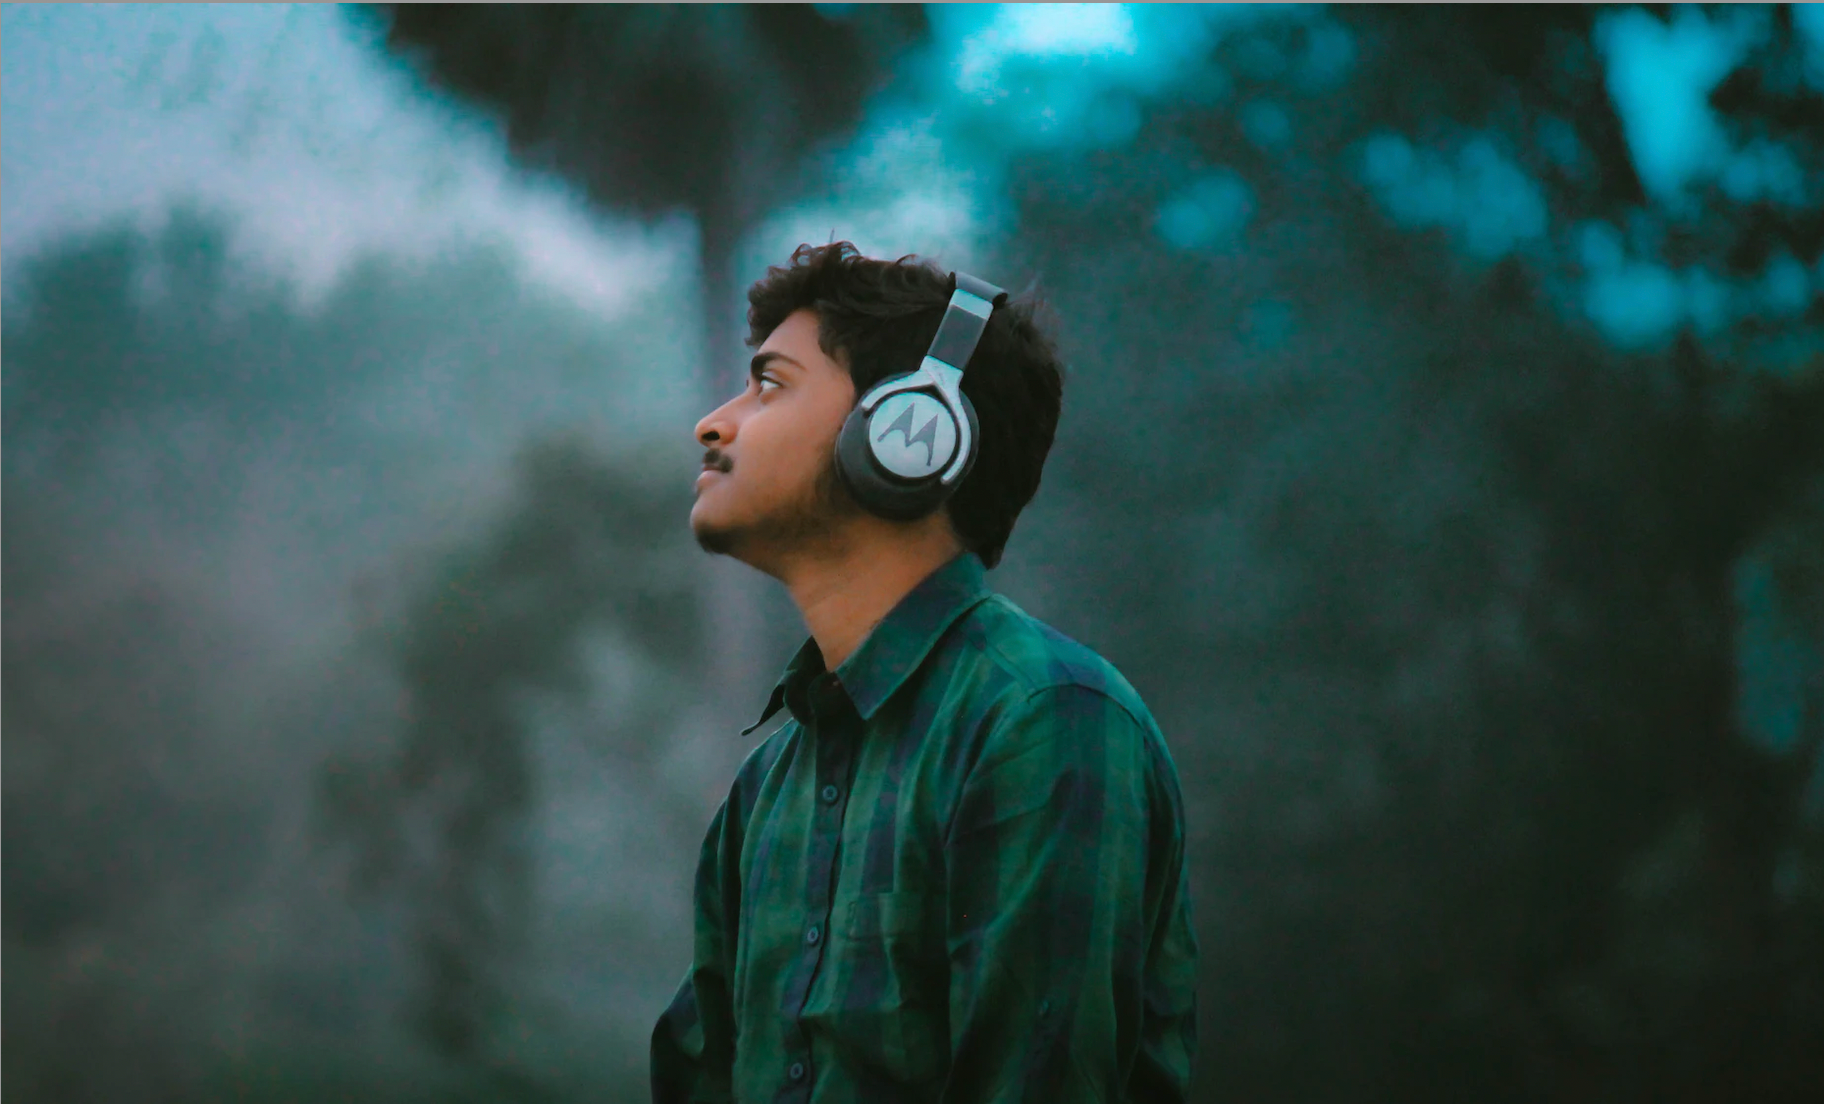 A man with headphones on stares thoughtfully into the distance. A forrest of trees is out of focus in the background.